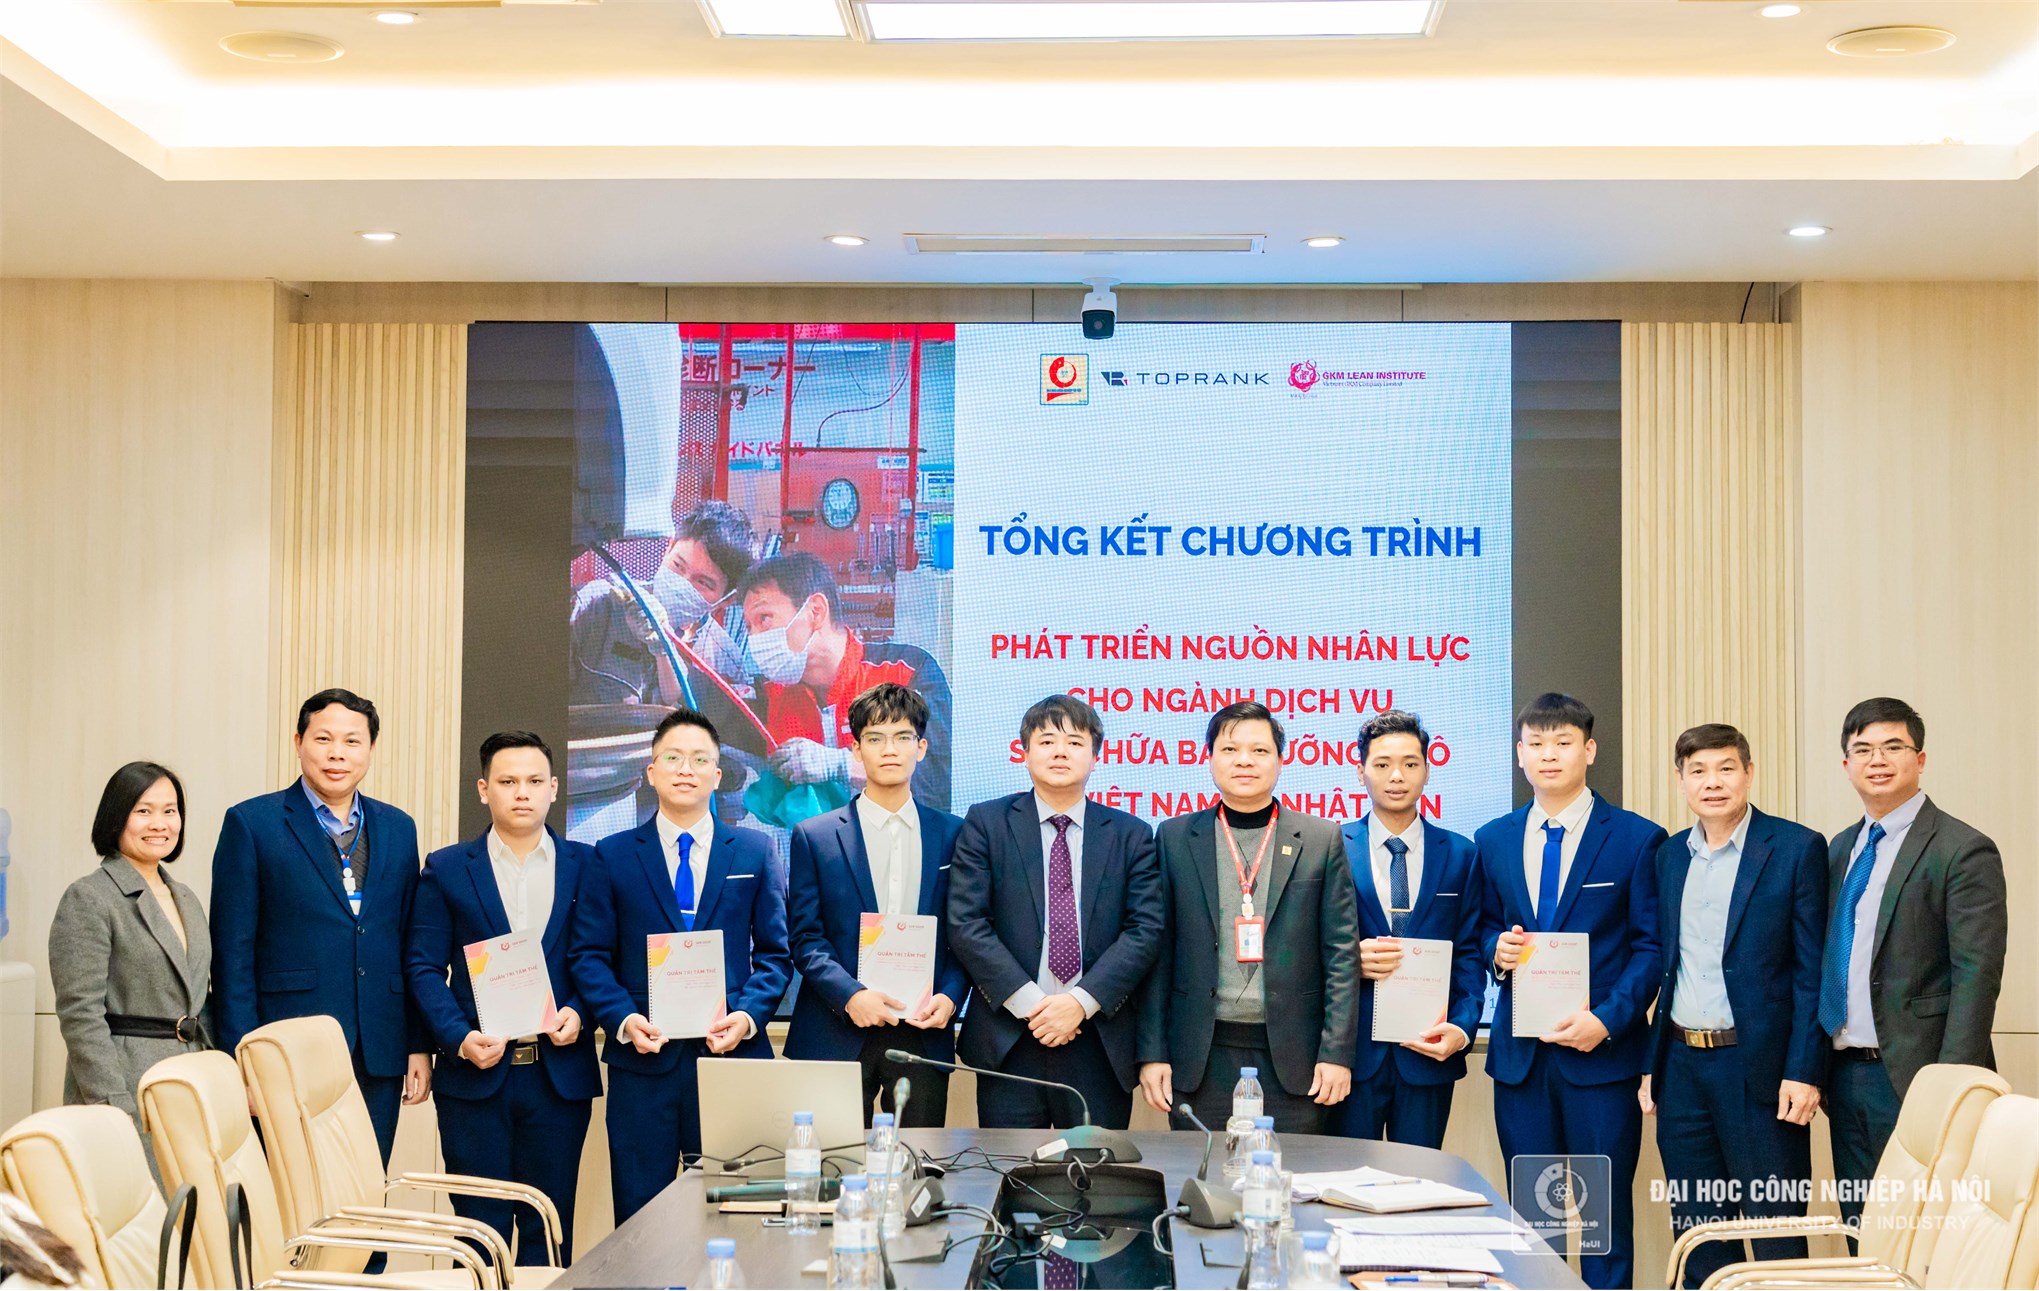 Review Conference of the Training Course on Developing Human Resources for the Automobile Repair and Maintenance Service Industry in Vietnam and Japan